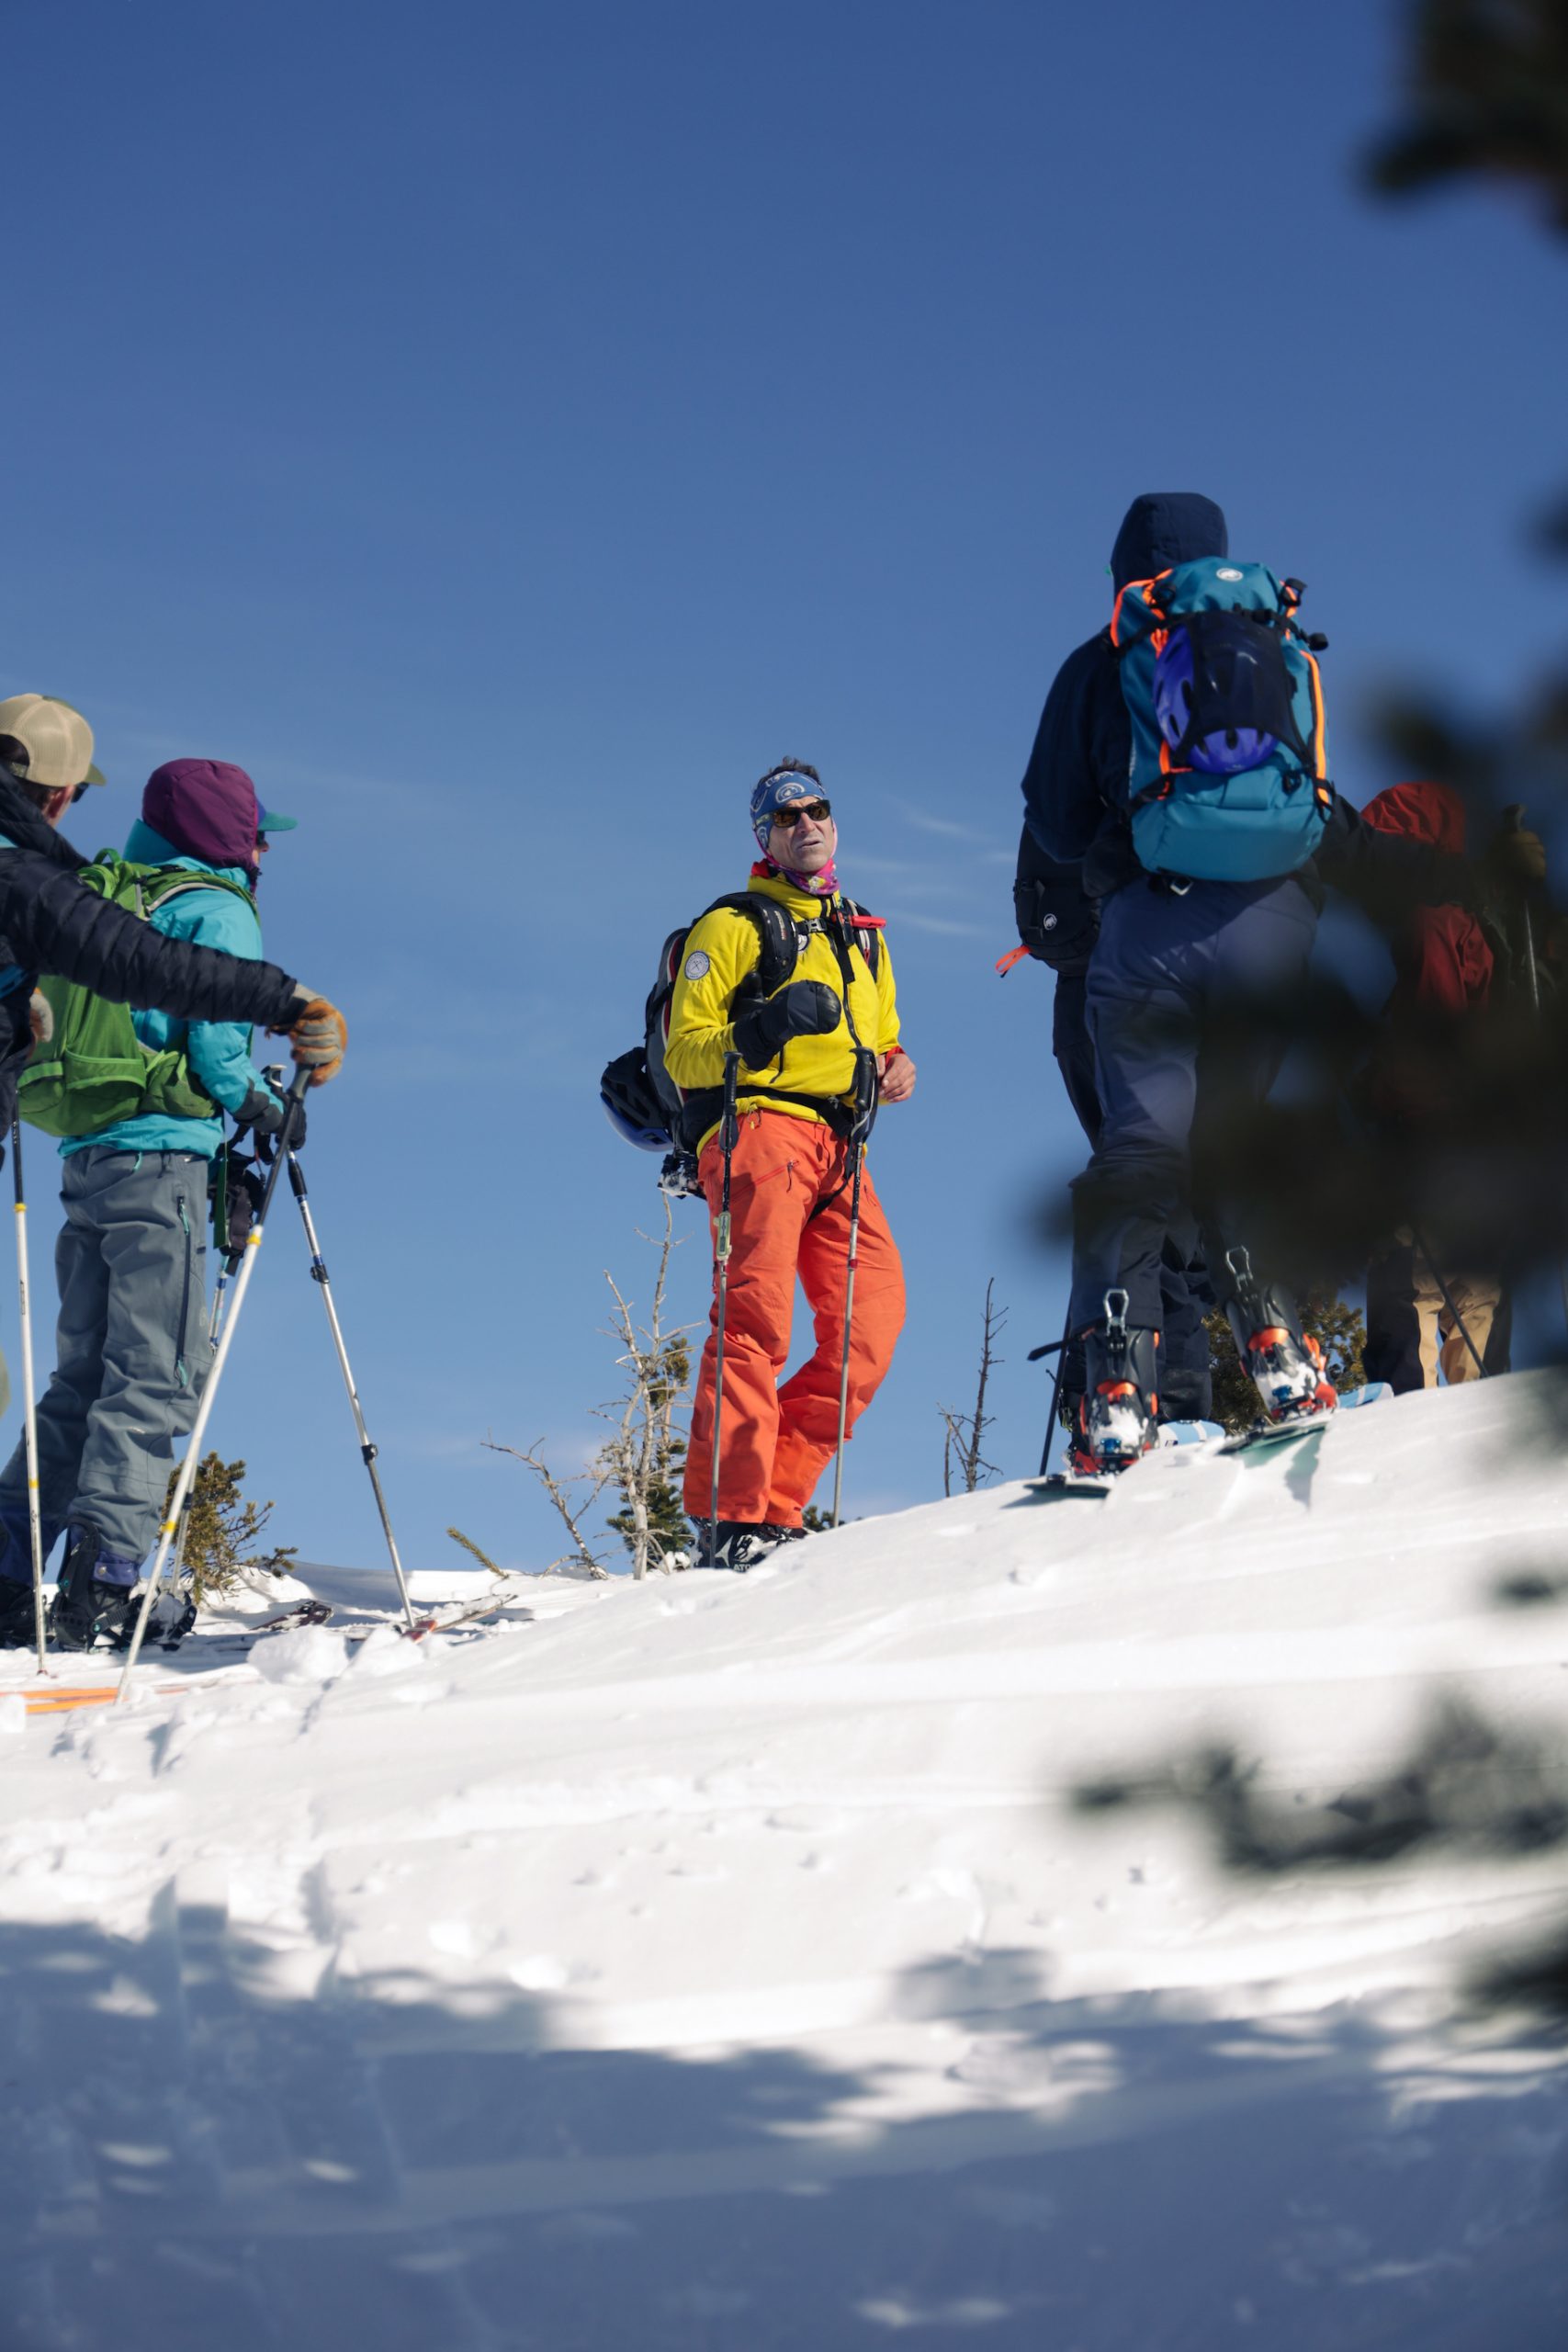 People standing and listening to a talk about crested butte backcountry skiing on a snowy slope